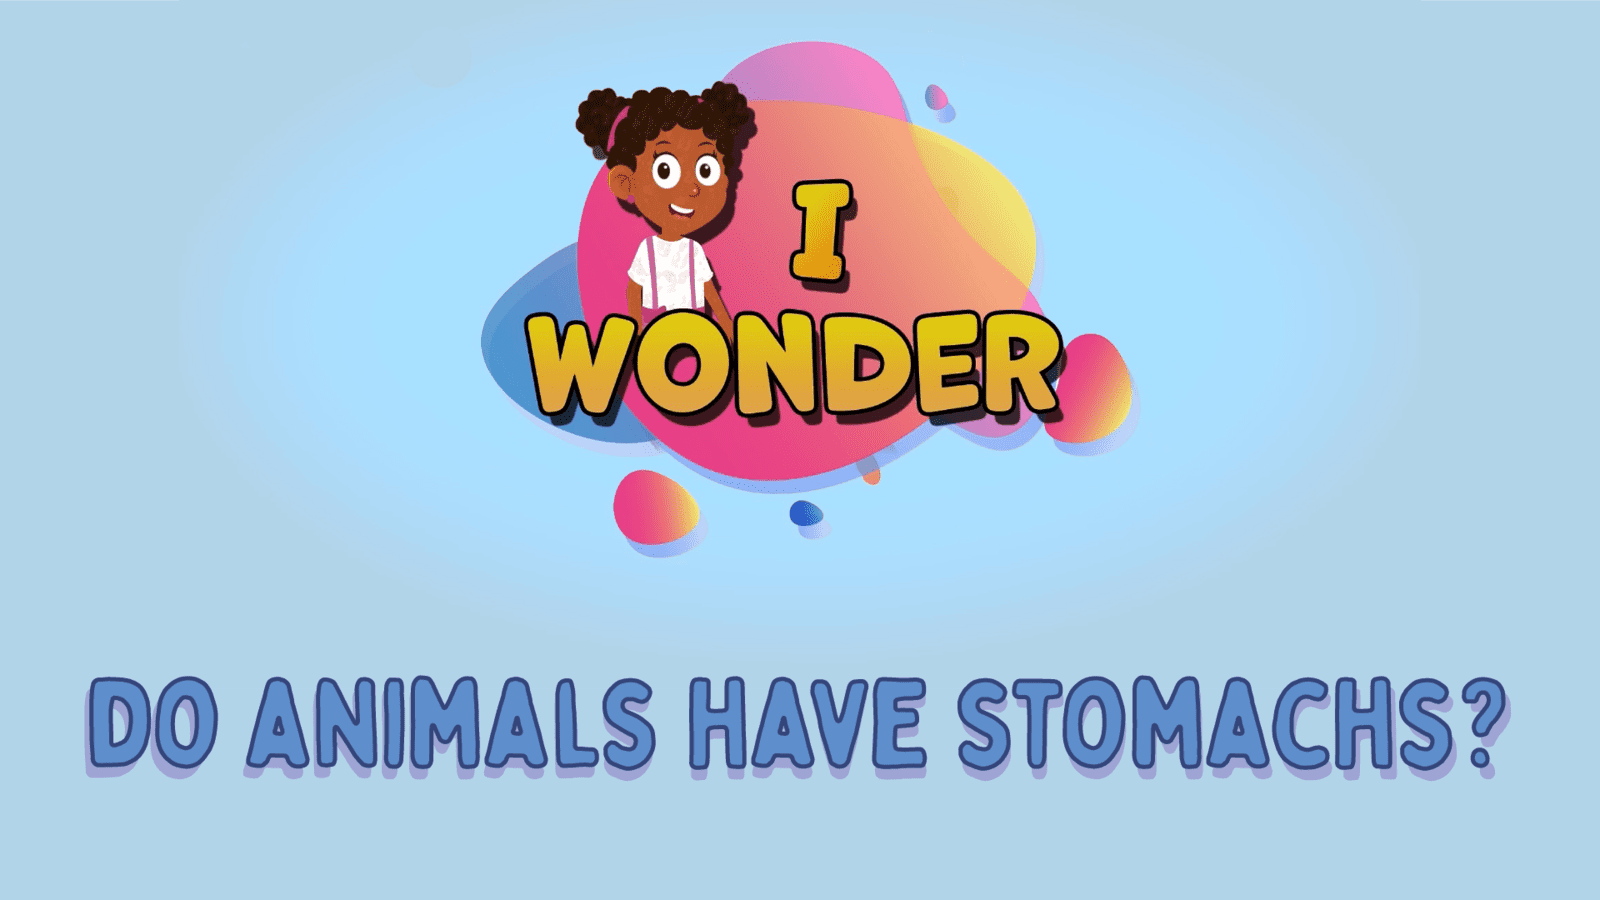 Do Animals Have Stomachs?